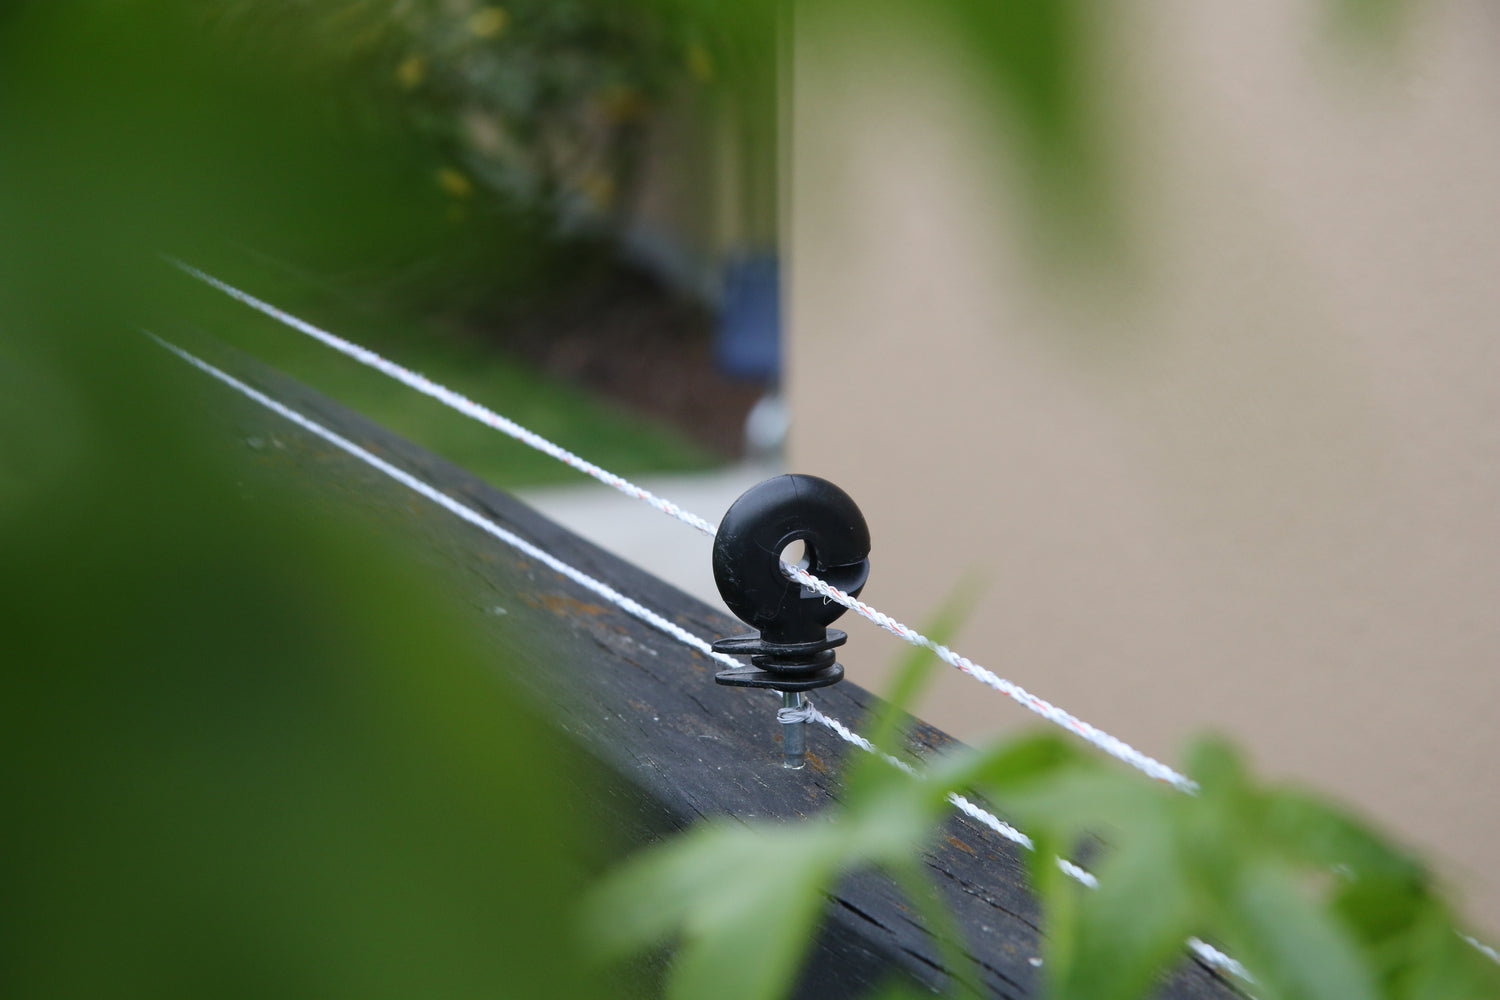 Cat Proof Fence which attaches to existing fence | SmartCats StayHome